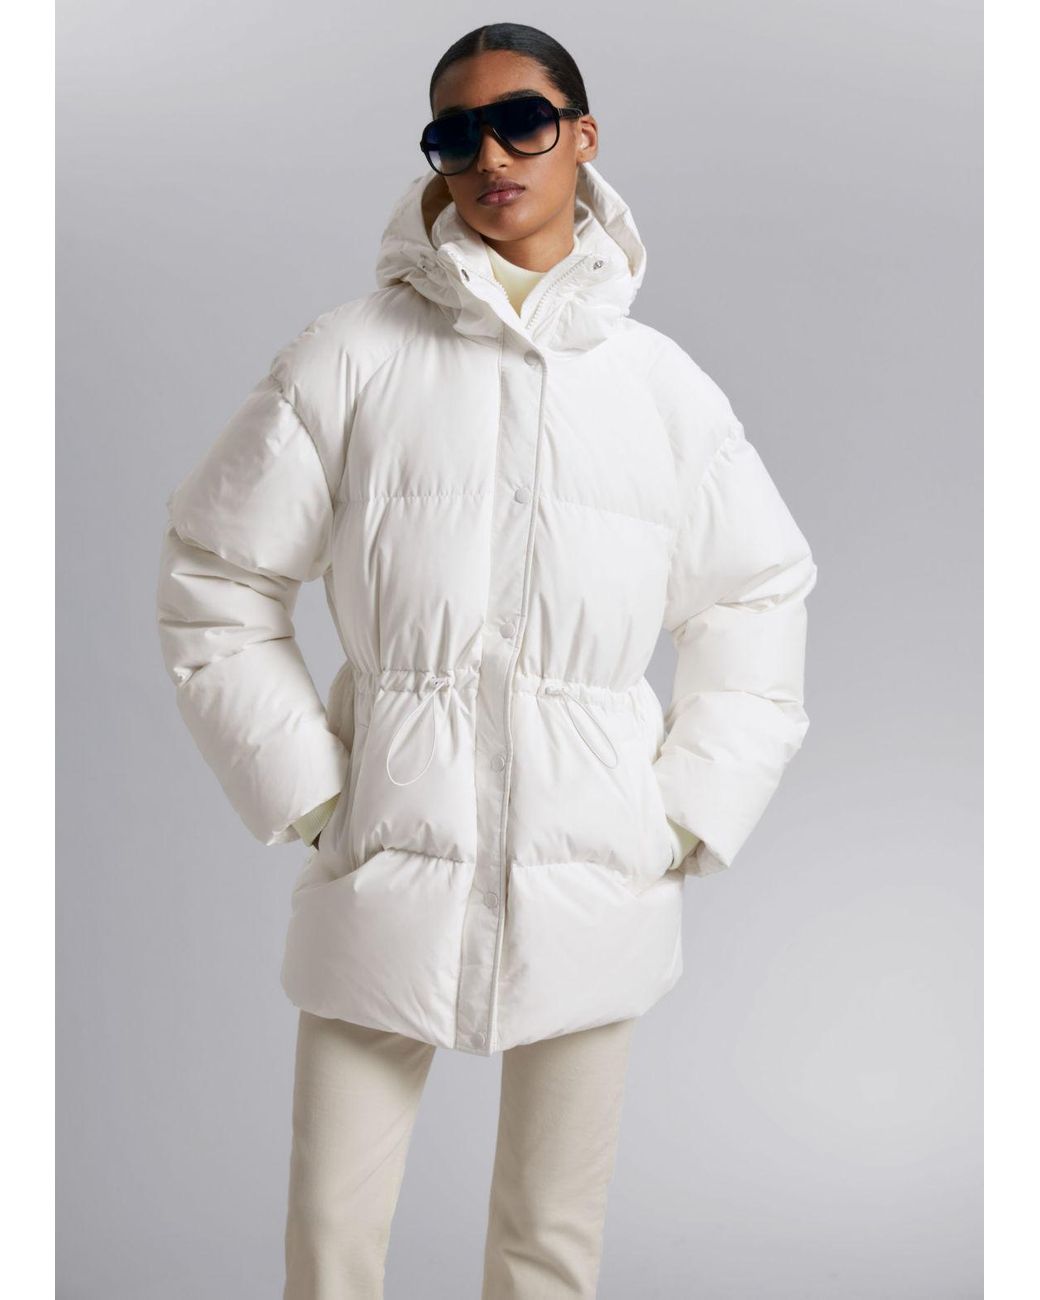 & Other Stories Oversized Hooded Down Puffer Jacket in White | Lyst